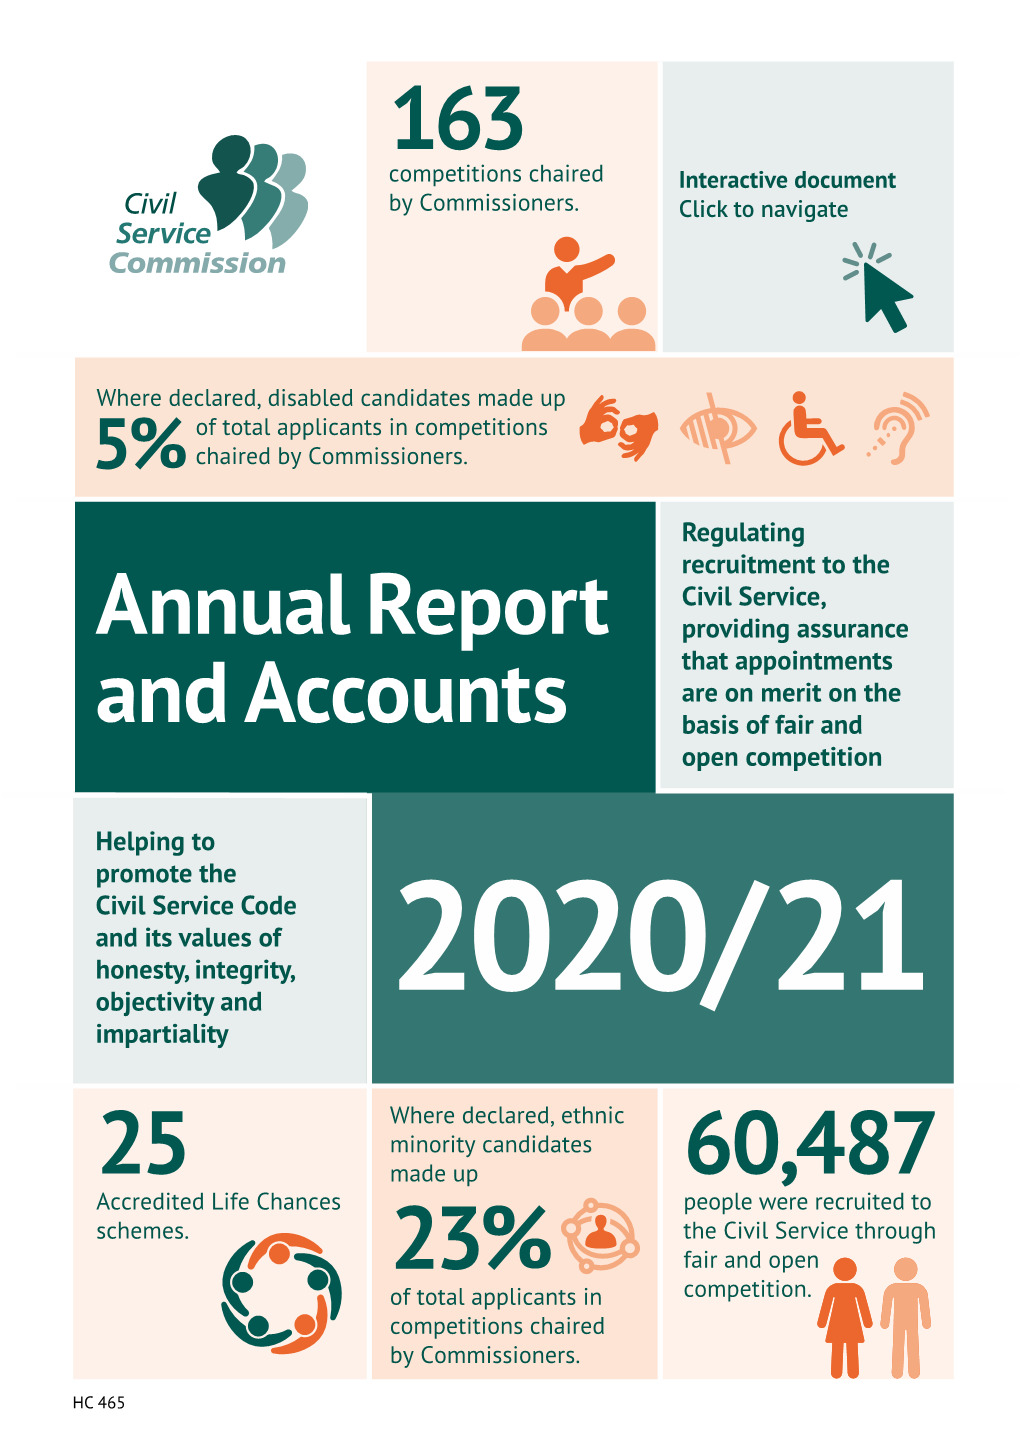 Civil Service Commission Annual Report and Accounts 2020/21